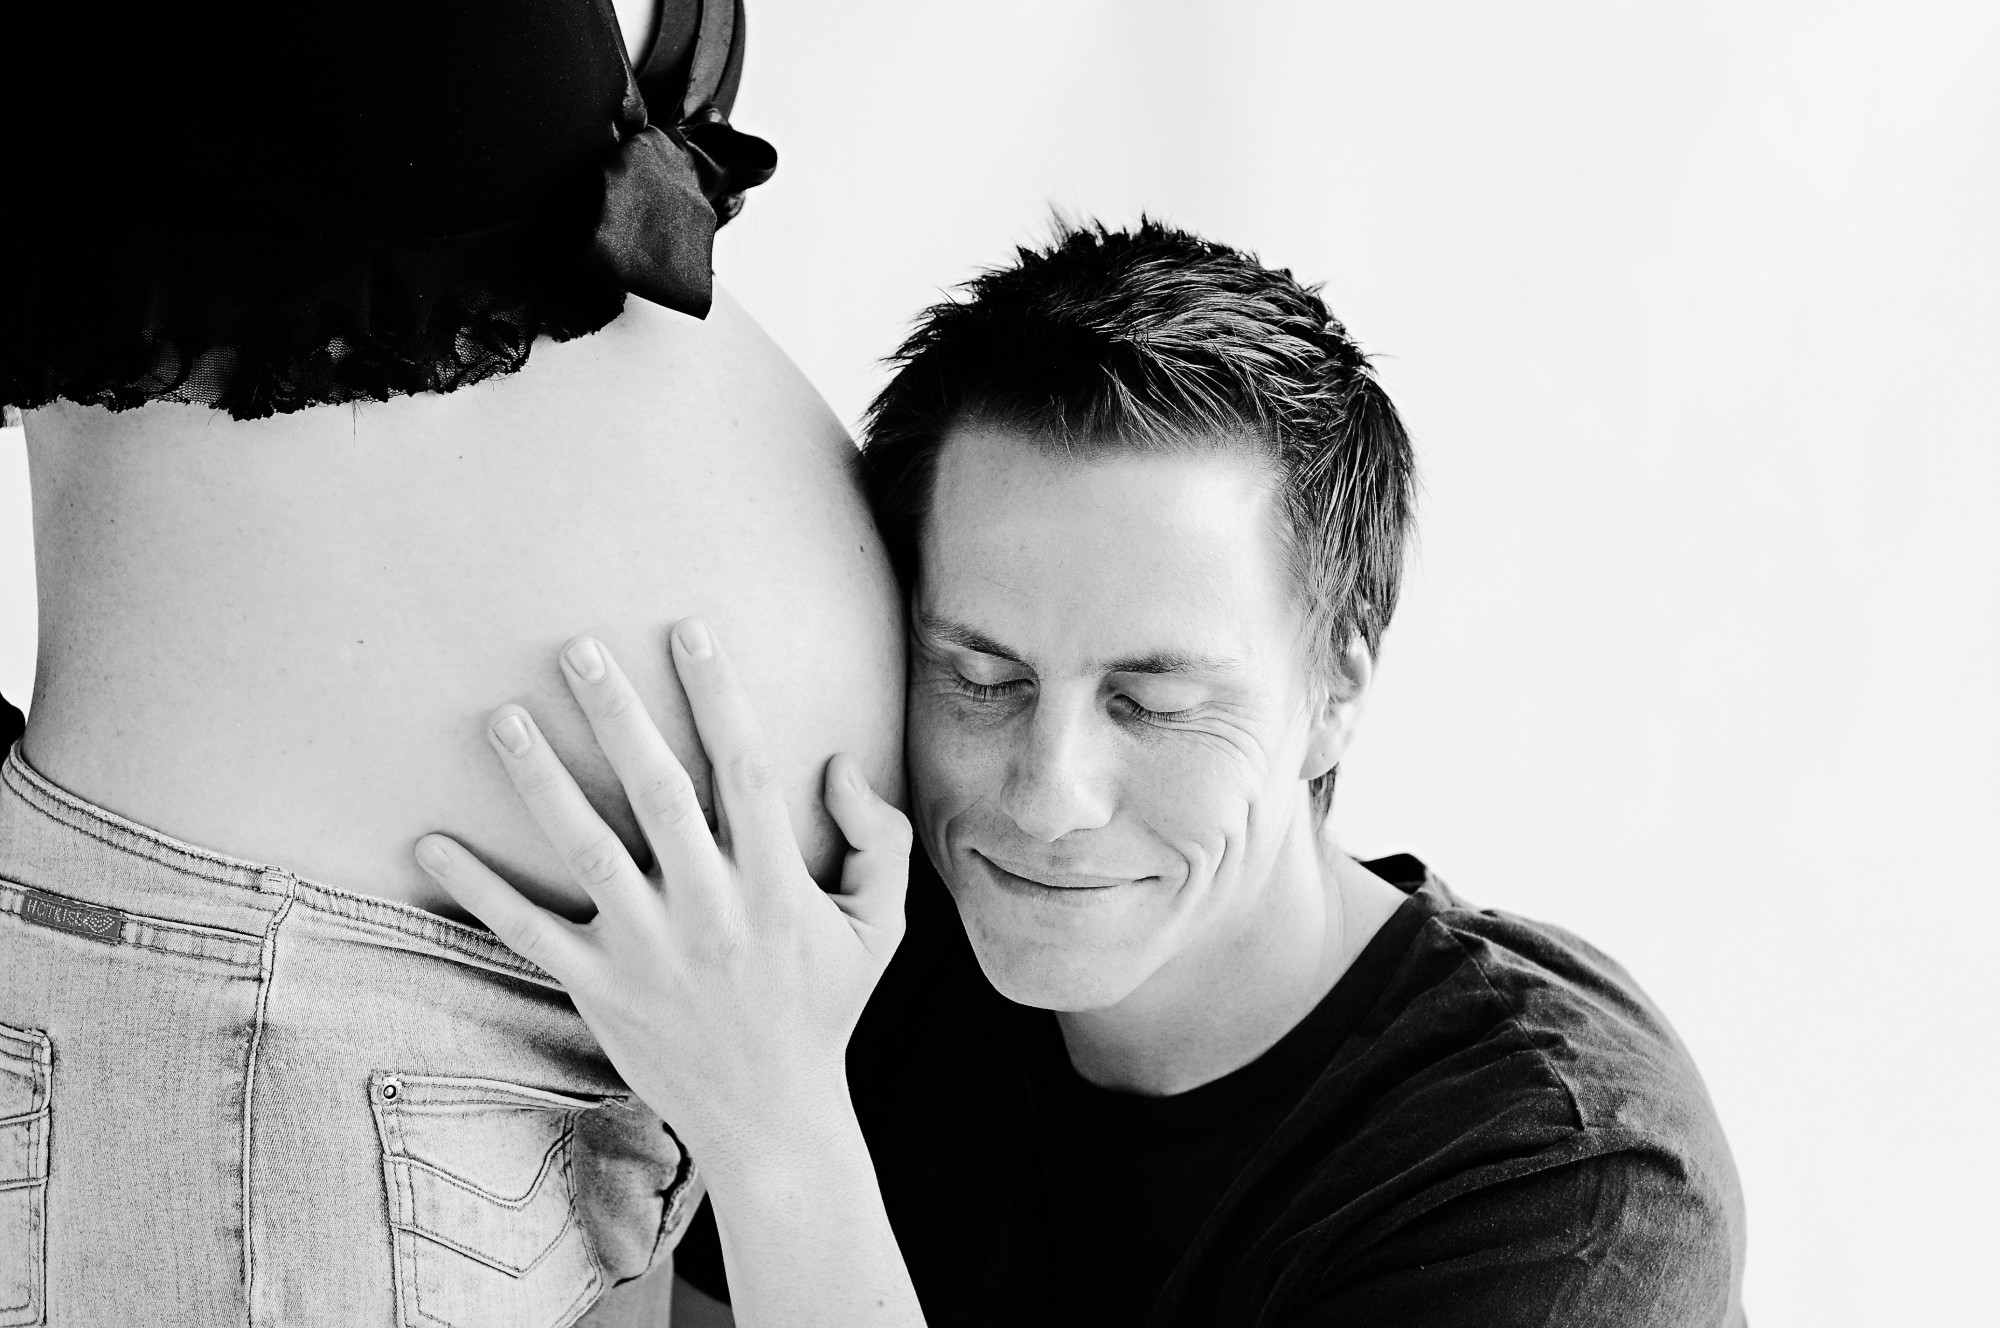 Maternity Pictures: 7 Key Tips for the Perfect Maternity Photo Shoot